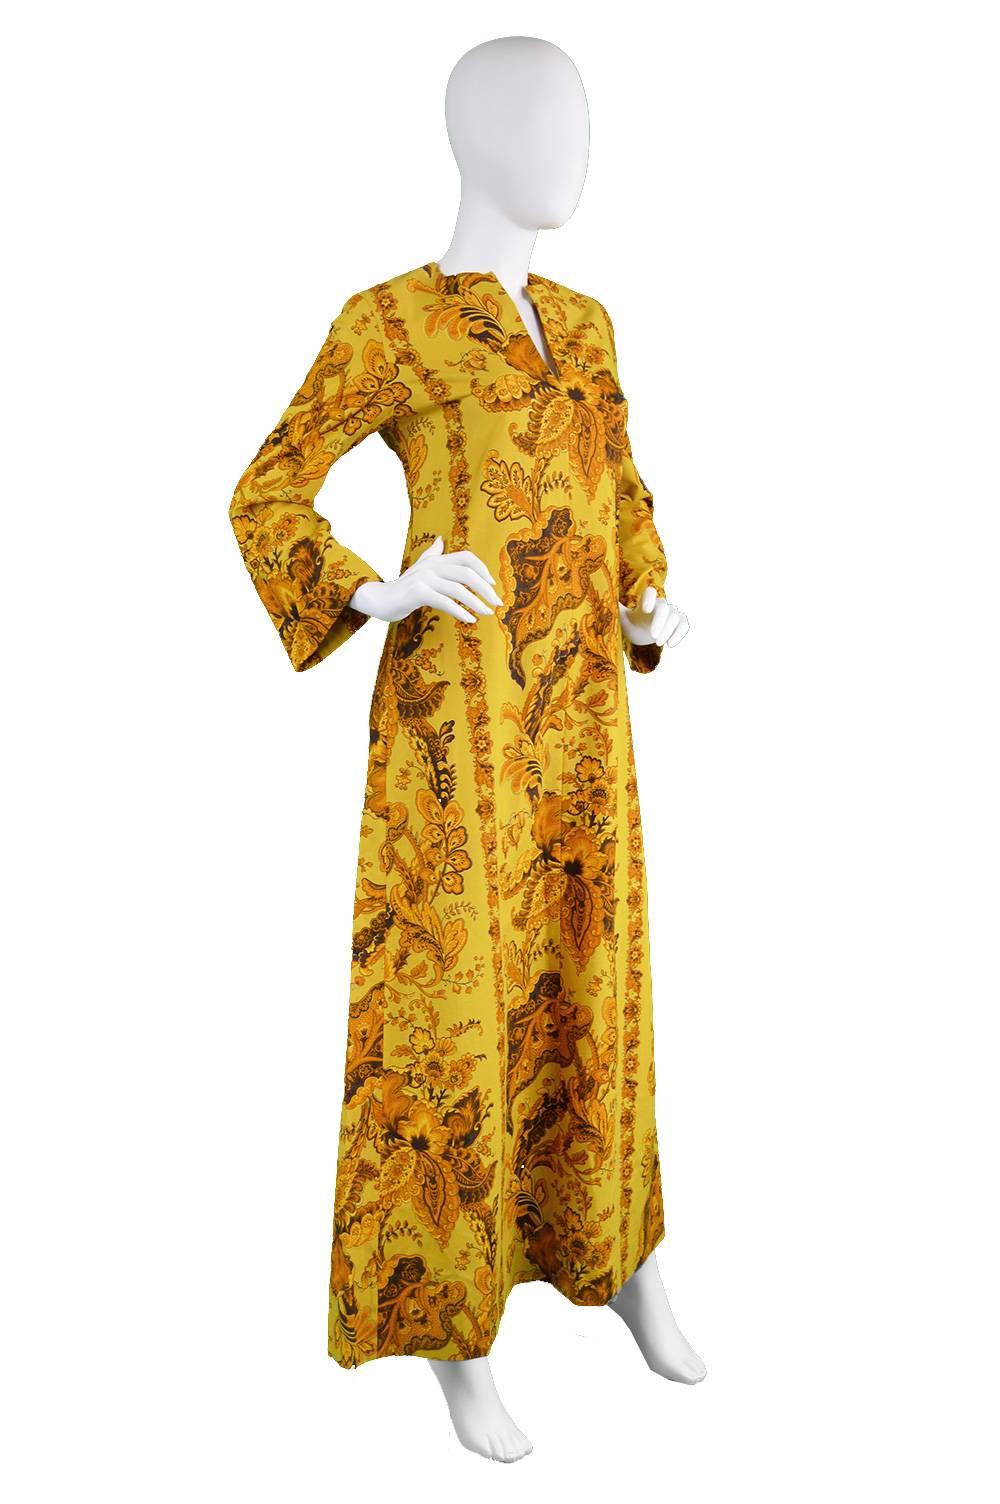 1960s Early Janice Wainwright for Simon Massey Maxi Kaftan Dress In Excellent Condition For Sale In Doncaster, South Yorkshire